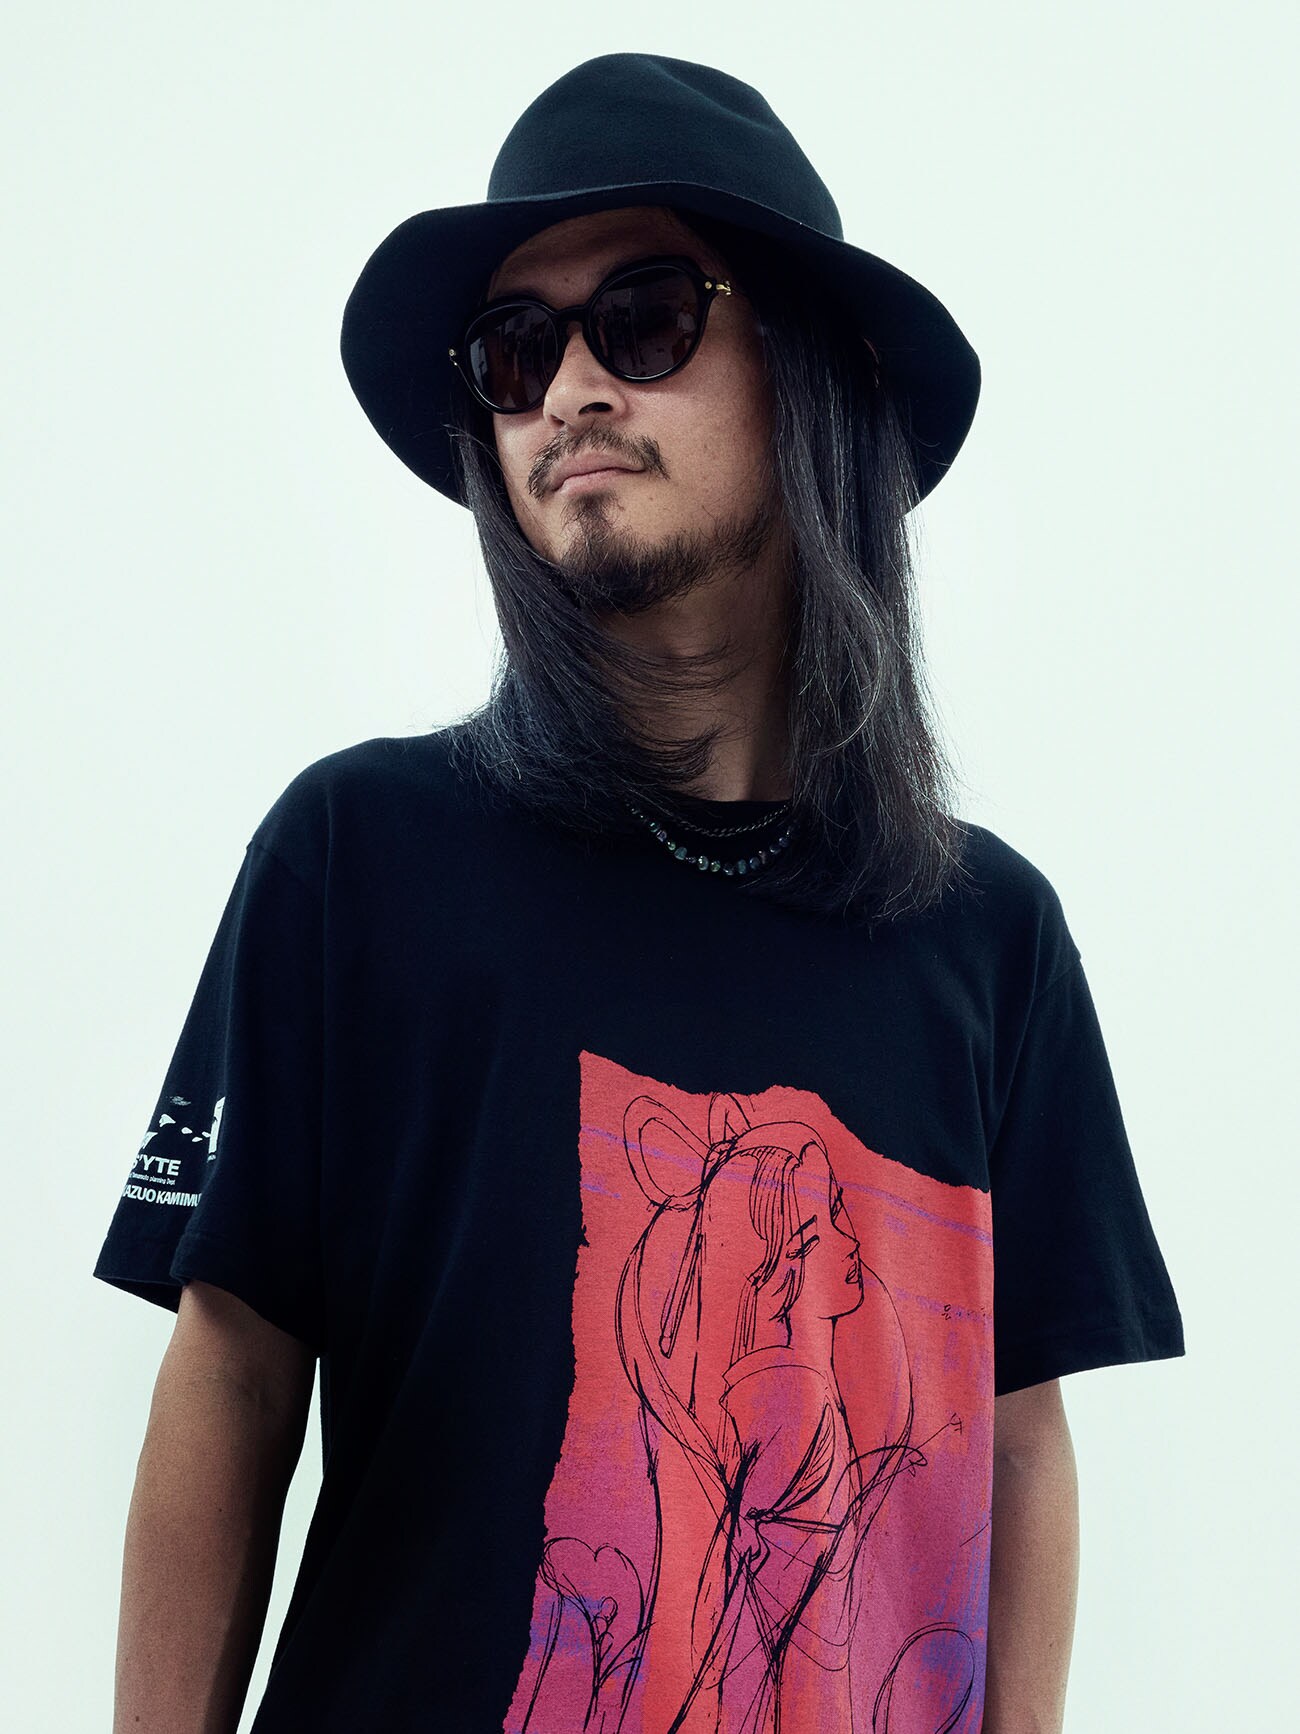 S'YTE x KAZUO KAMIMURA-幻の一枚絵-COTTON JERSEY T-SHIRT WITH PRINTED ILLUSTRATION